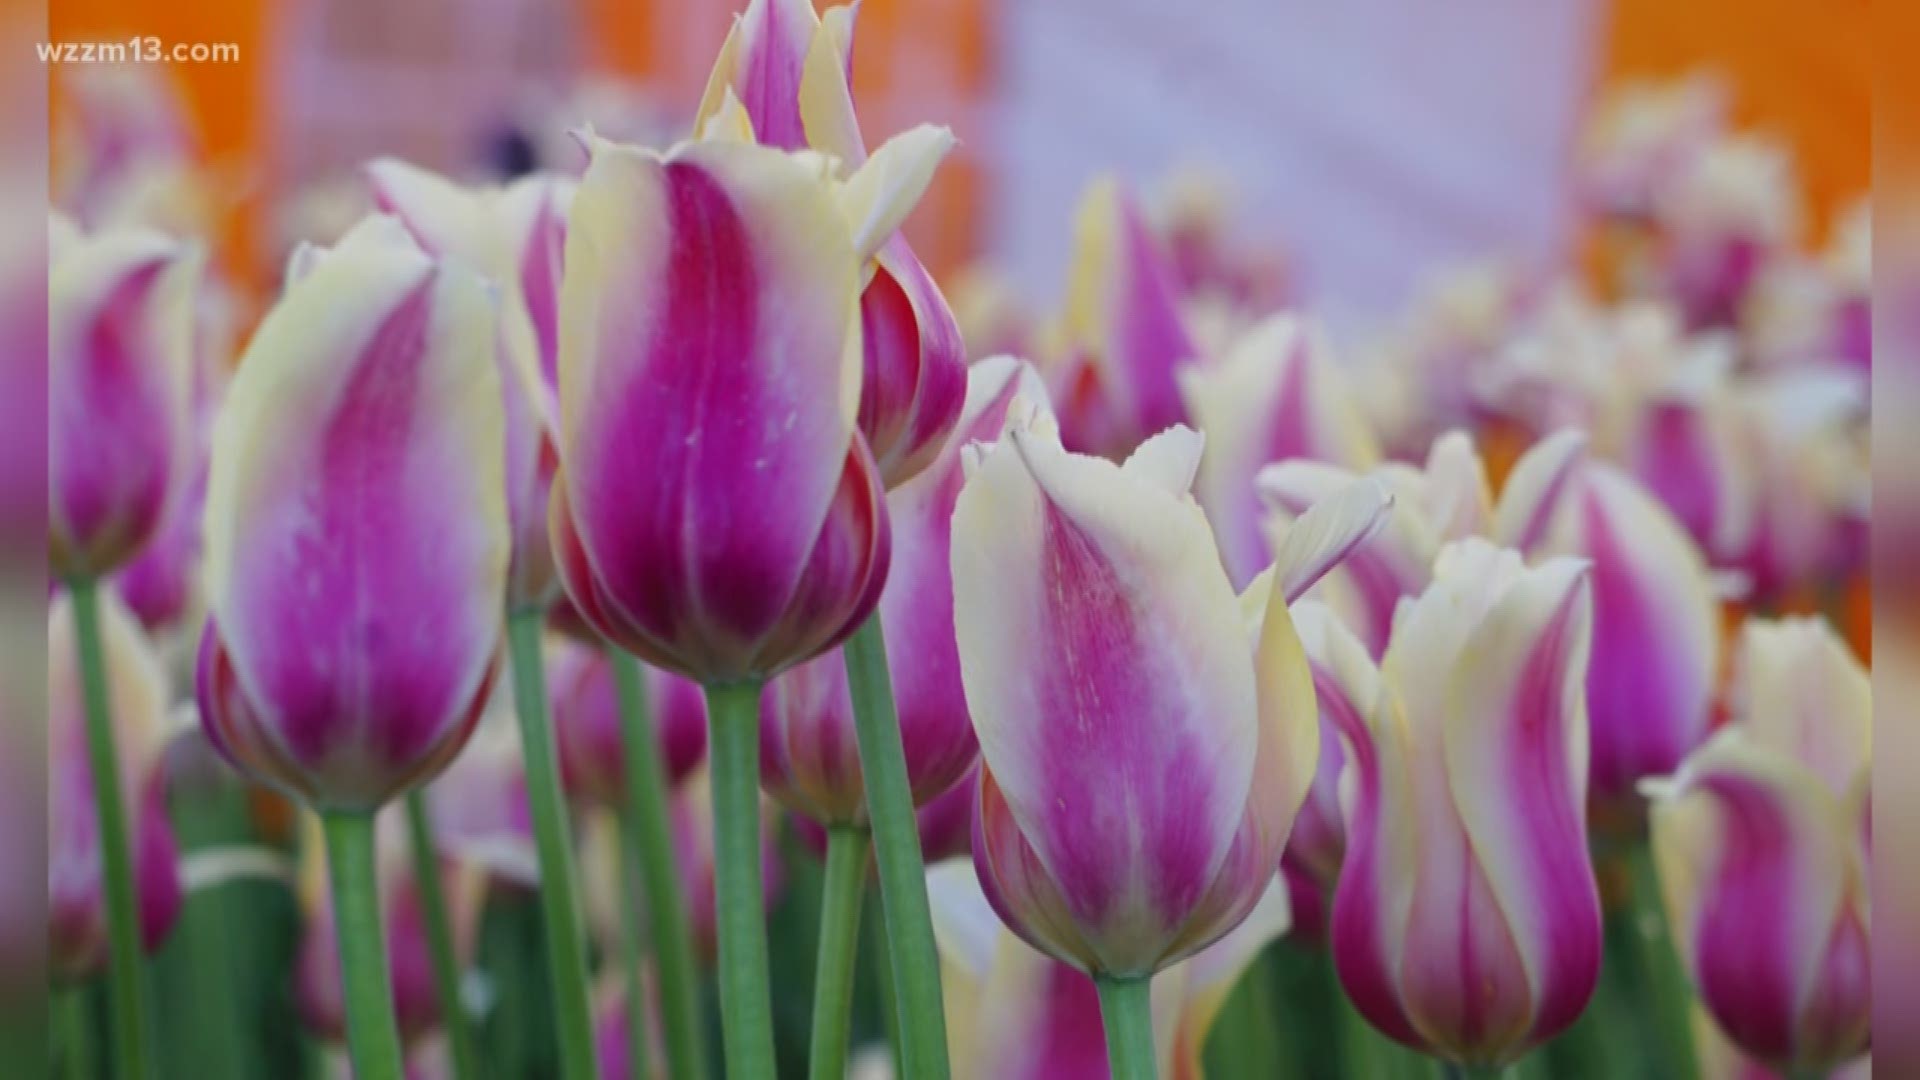 It's been 90 years and Tulip Time is still going strong.